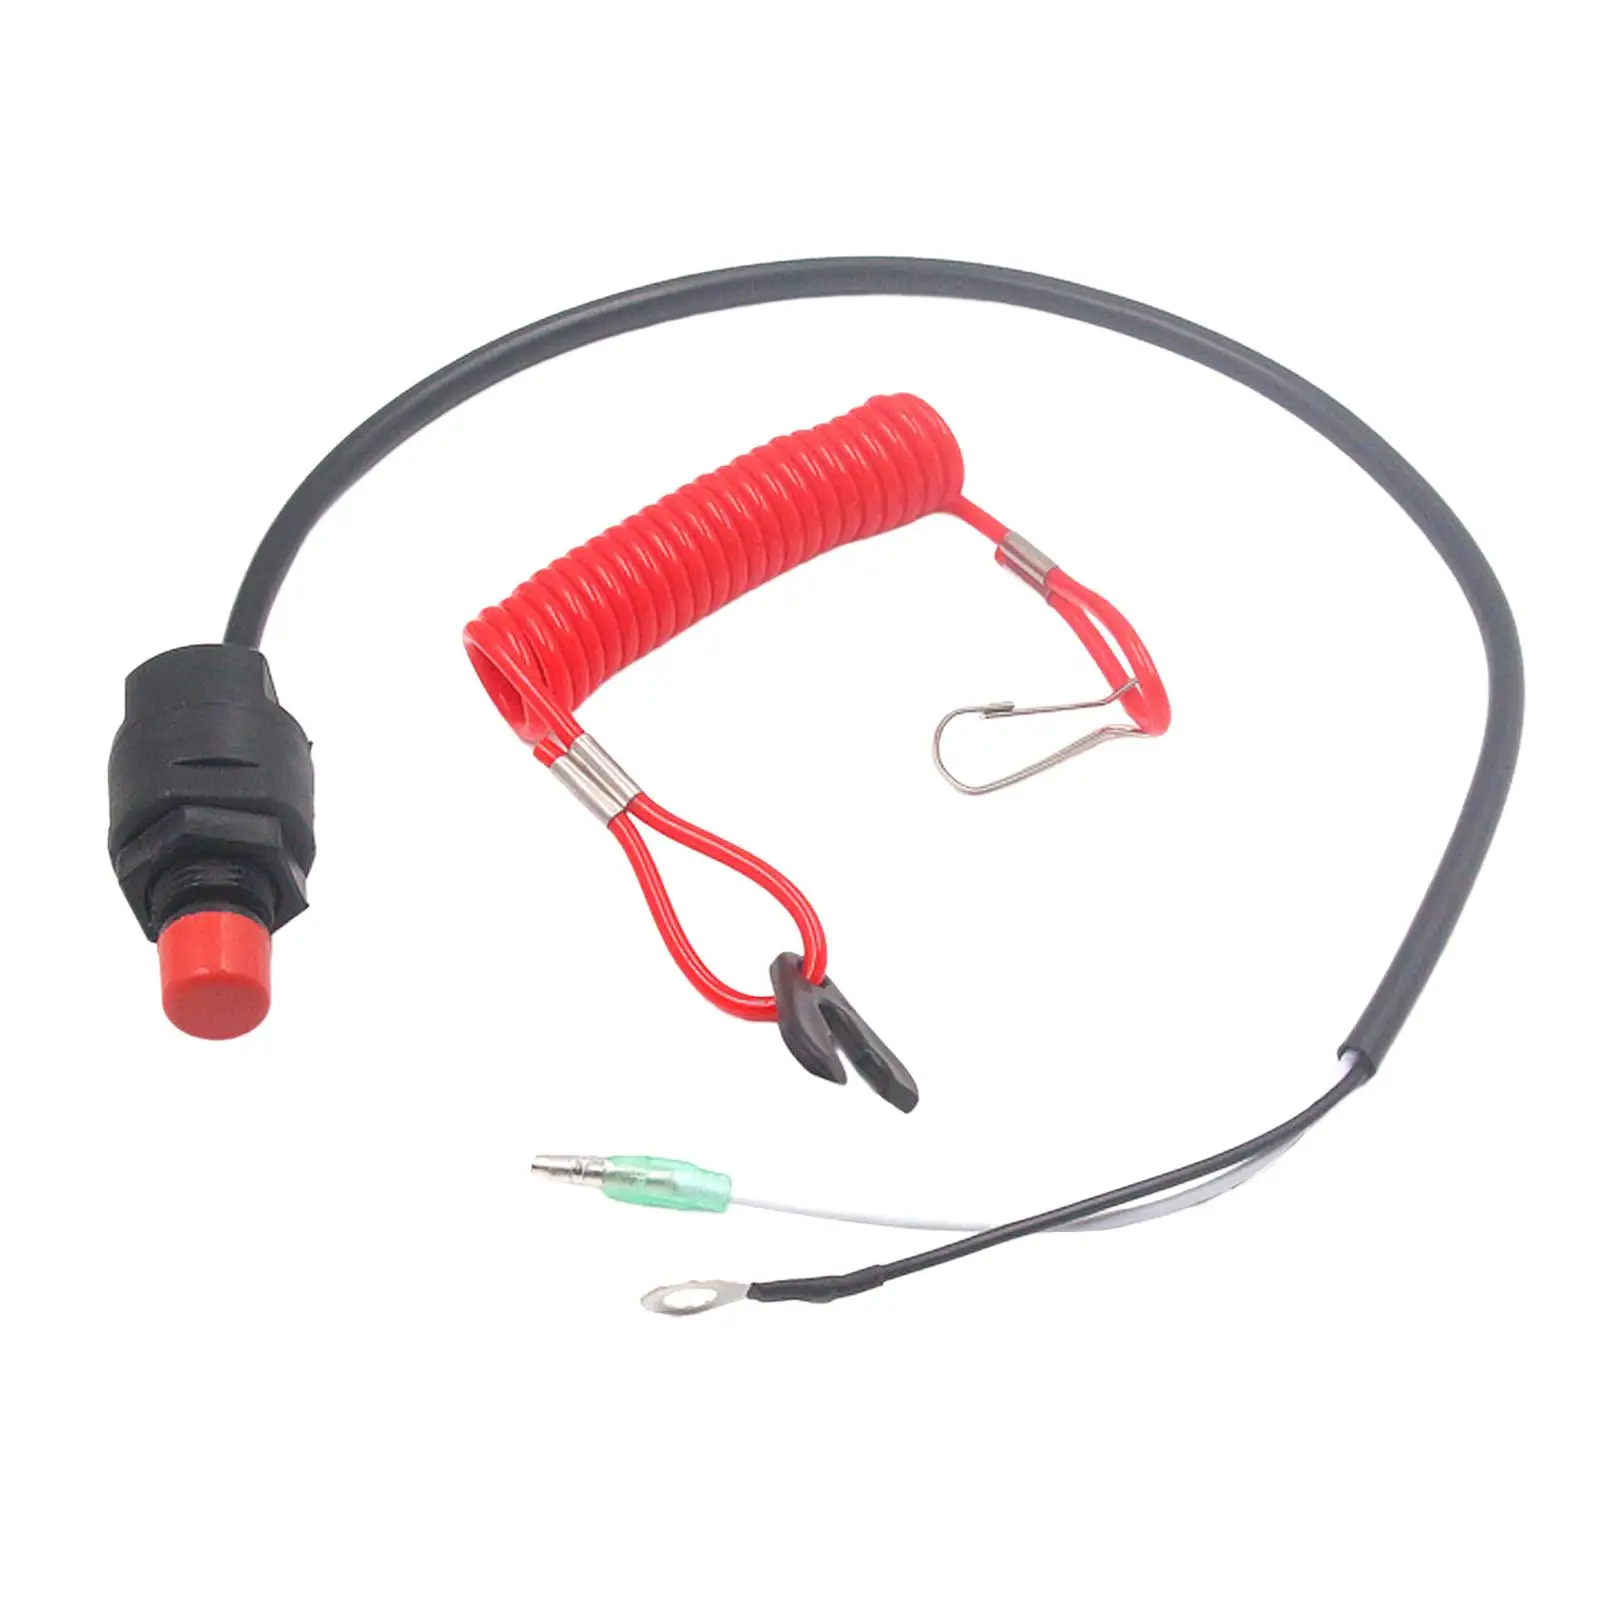 Kill Stop Switch Safety Tether for Boat Outboard Parts Replacement